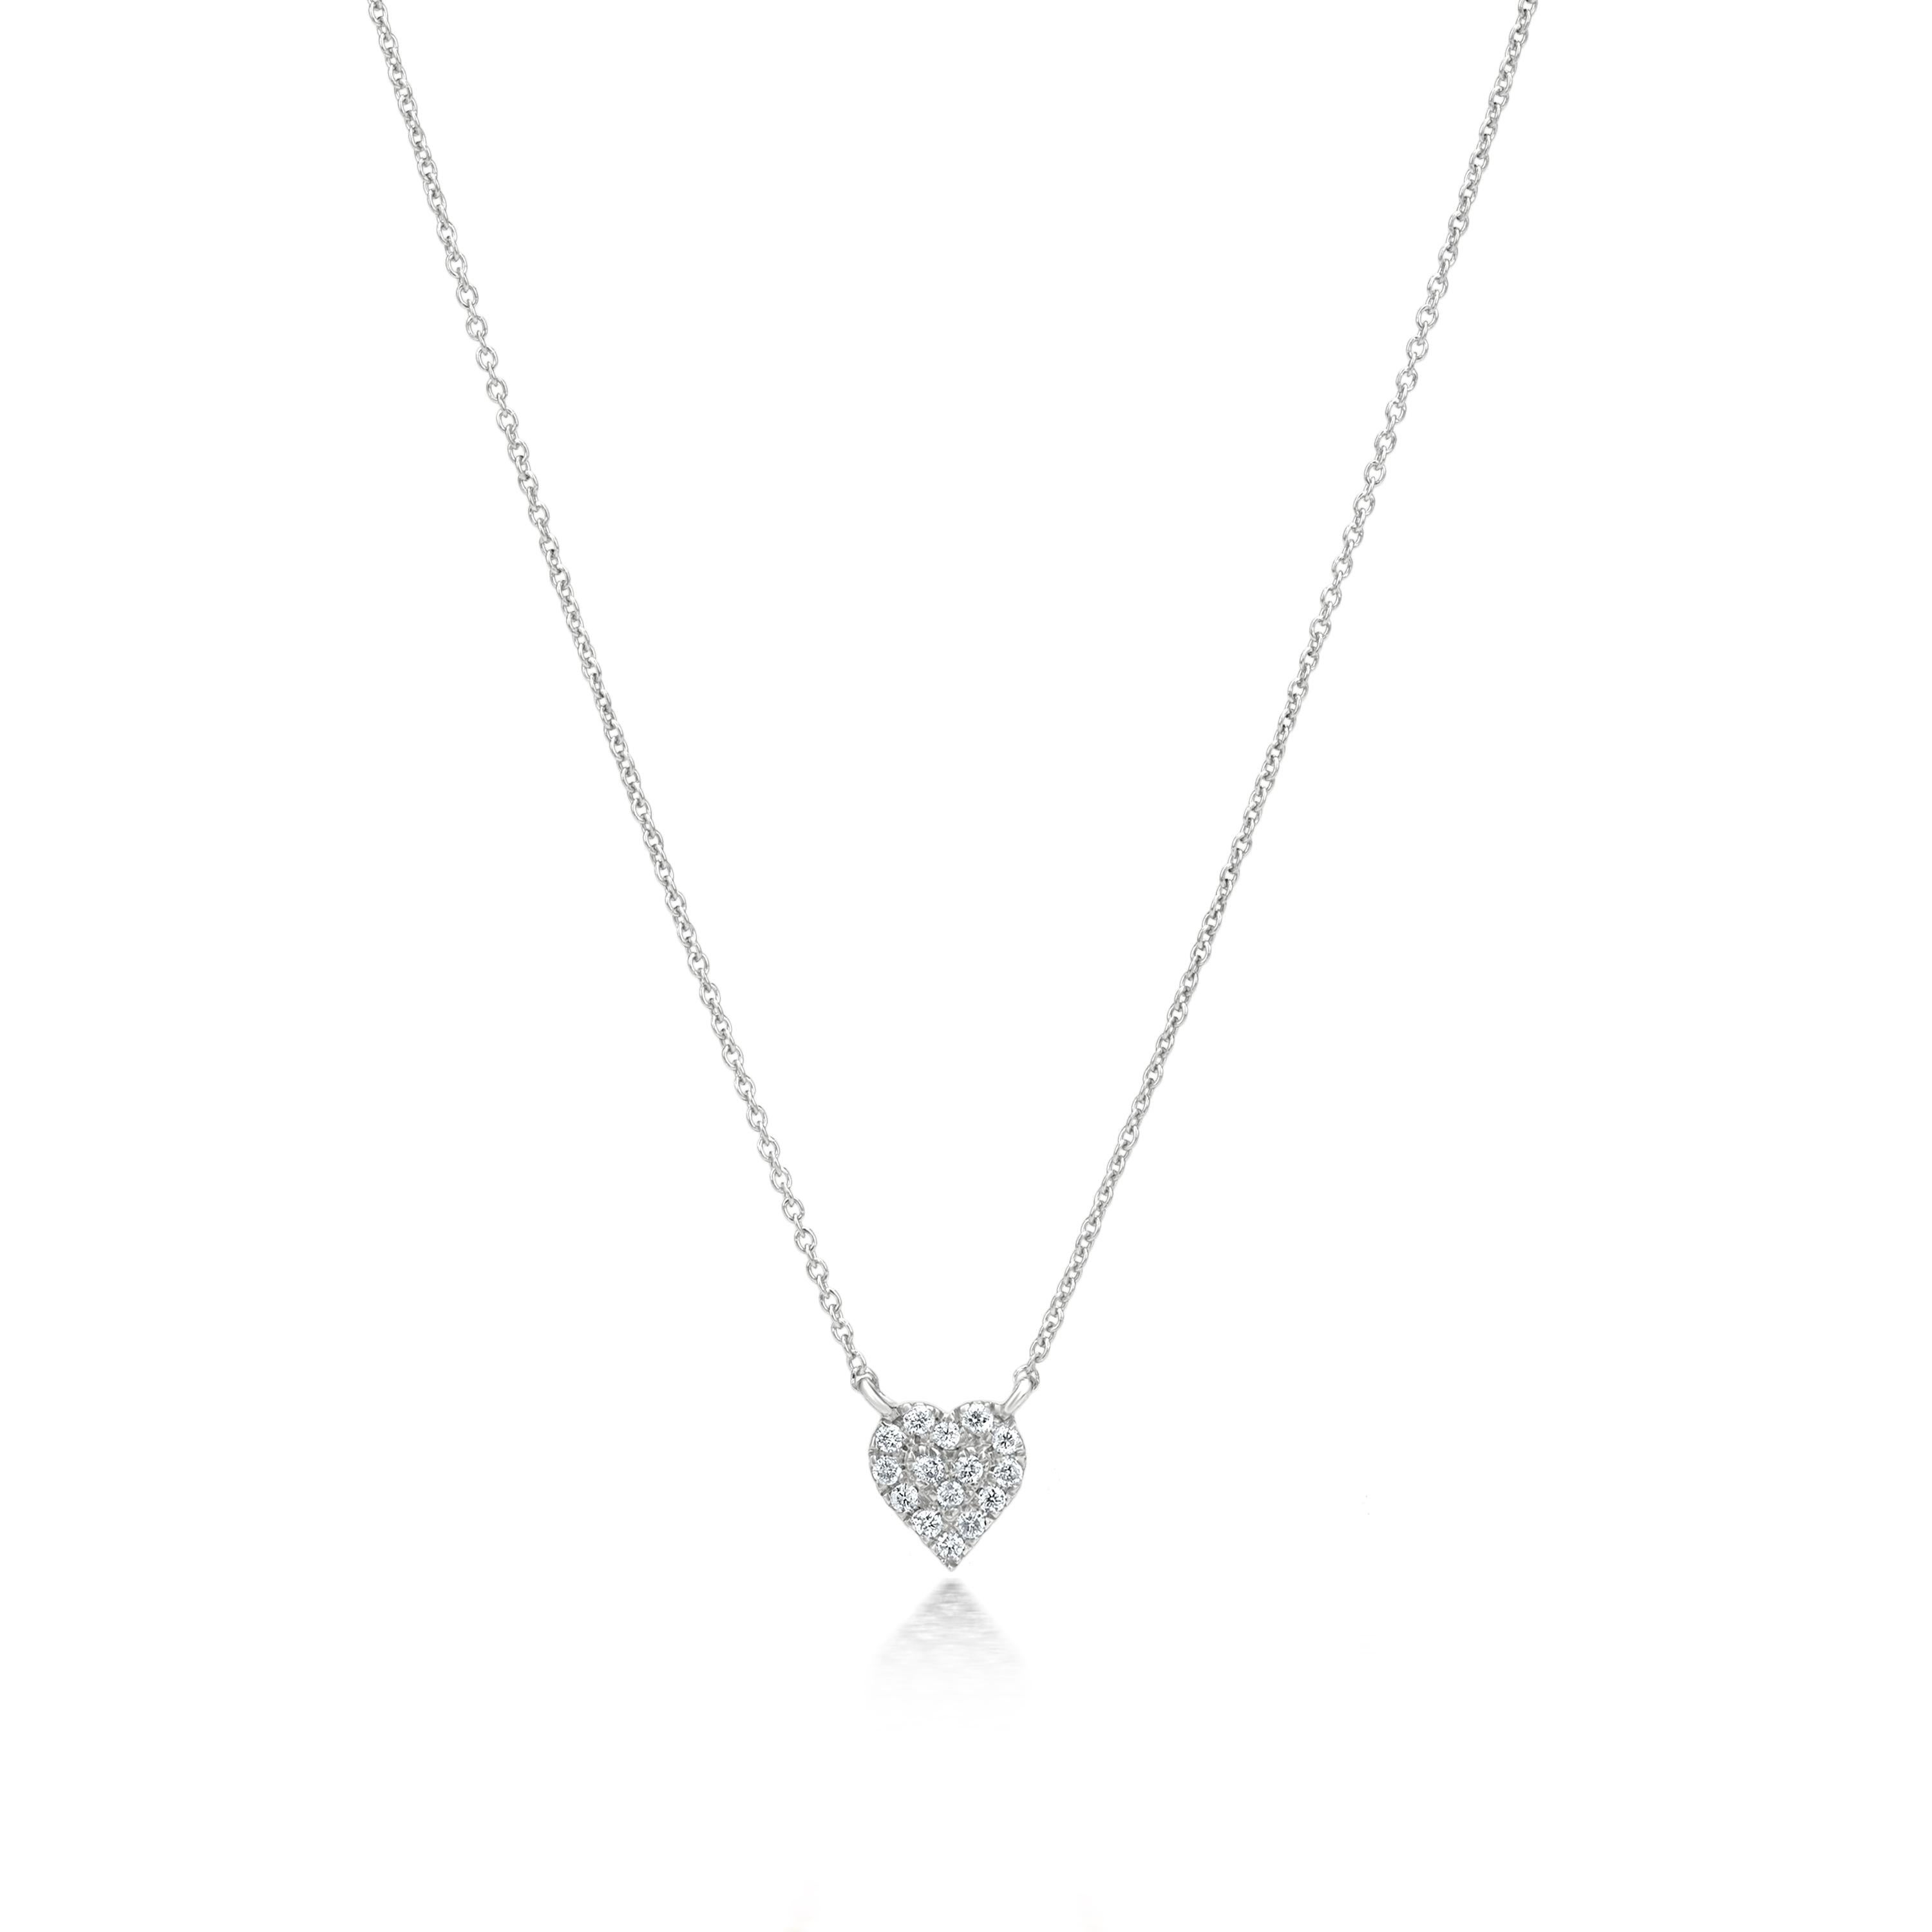 Grace your neckline with a Luxle heart pendant symbolizes attraction, affection, cohesion, unity, femininity, and sensuality. Subtle yet pretty this heart pendant necklace is the new fashion statement. It is featured with 15 round cut diamonds,